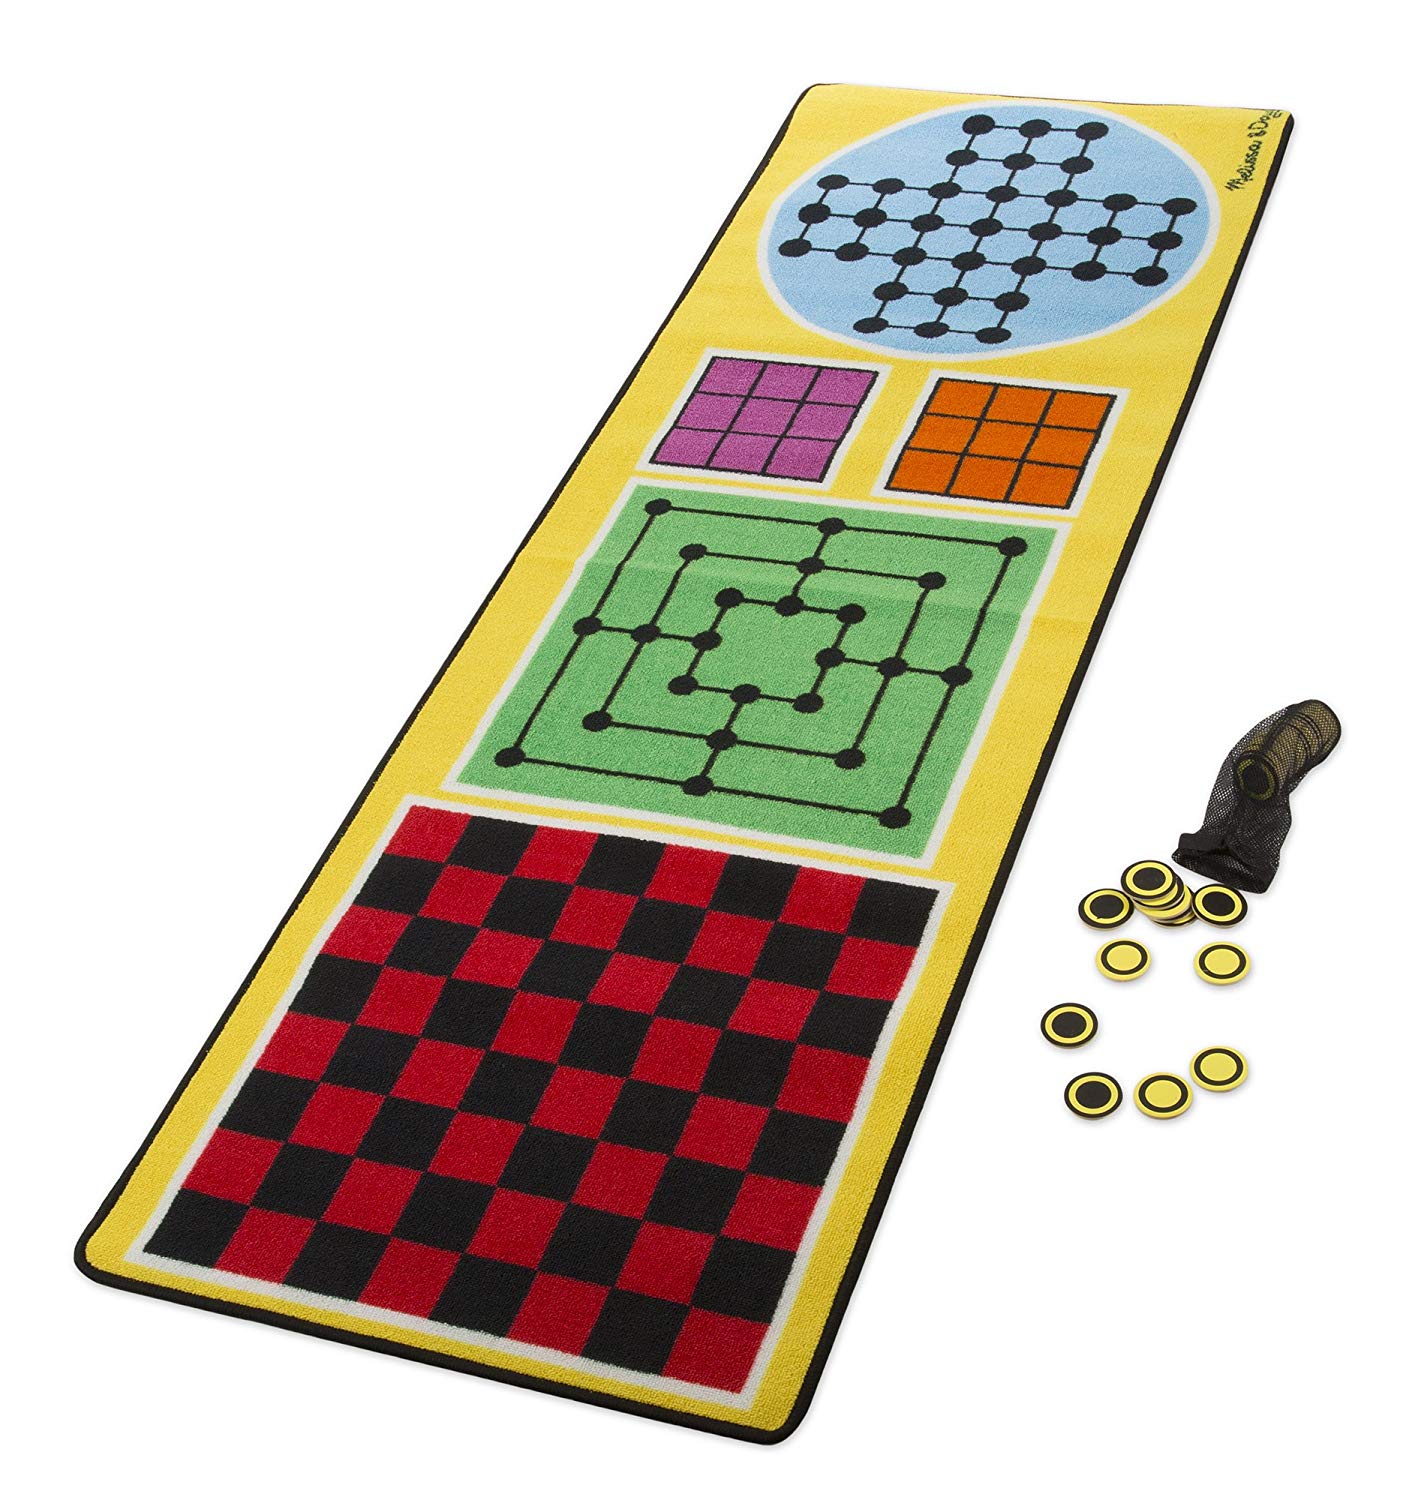 Melissa & Doug 19424 4 In 1 Play Mat 4 Board Games, 36 Playing Pieces 200 X